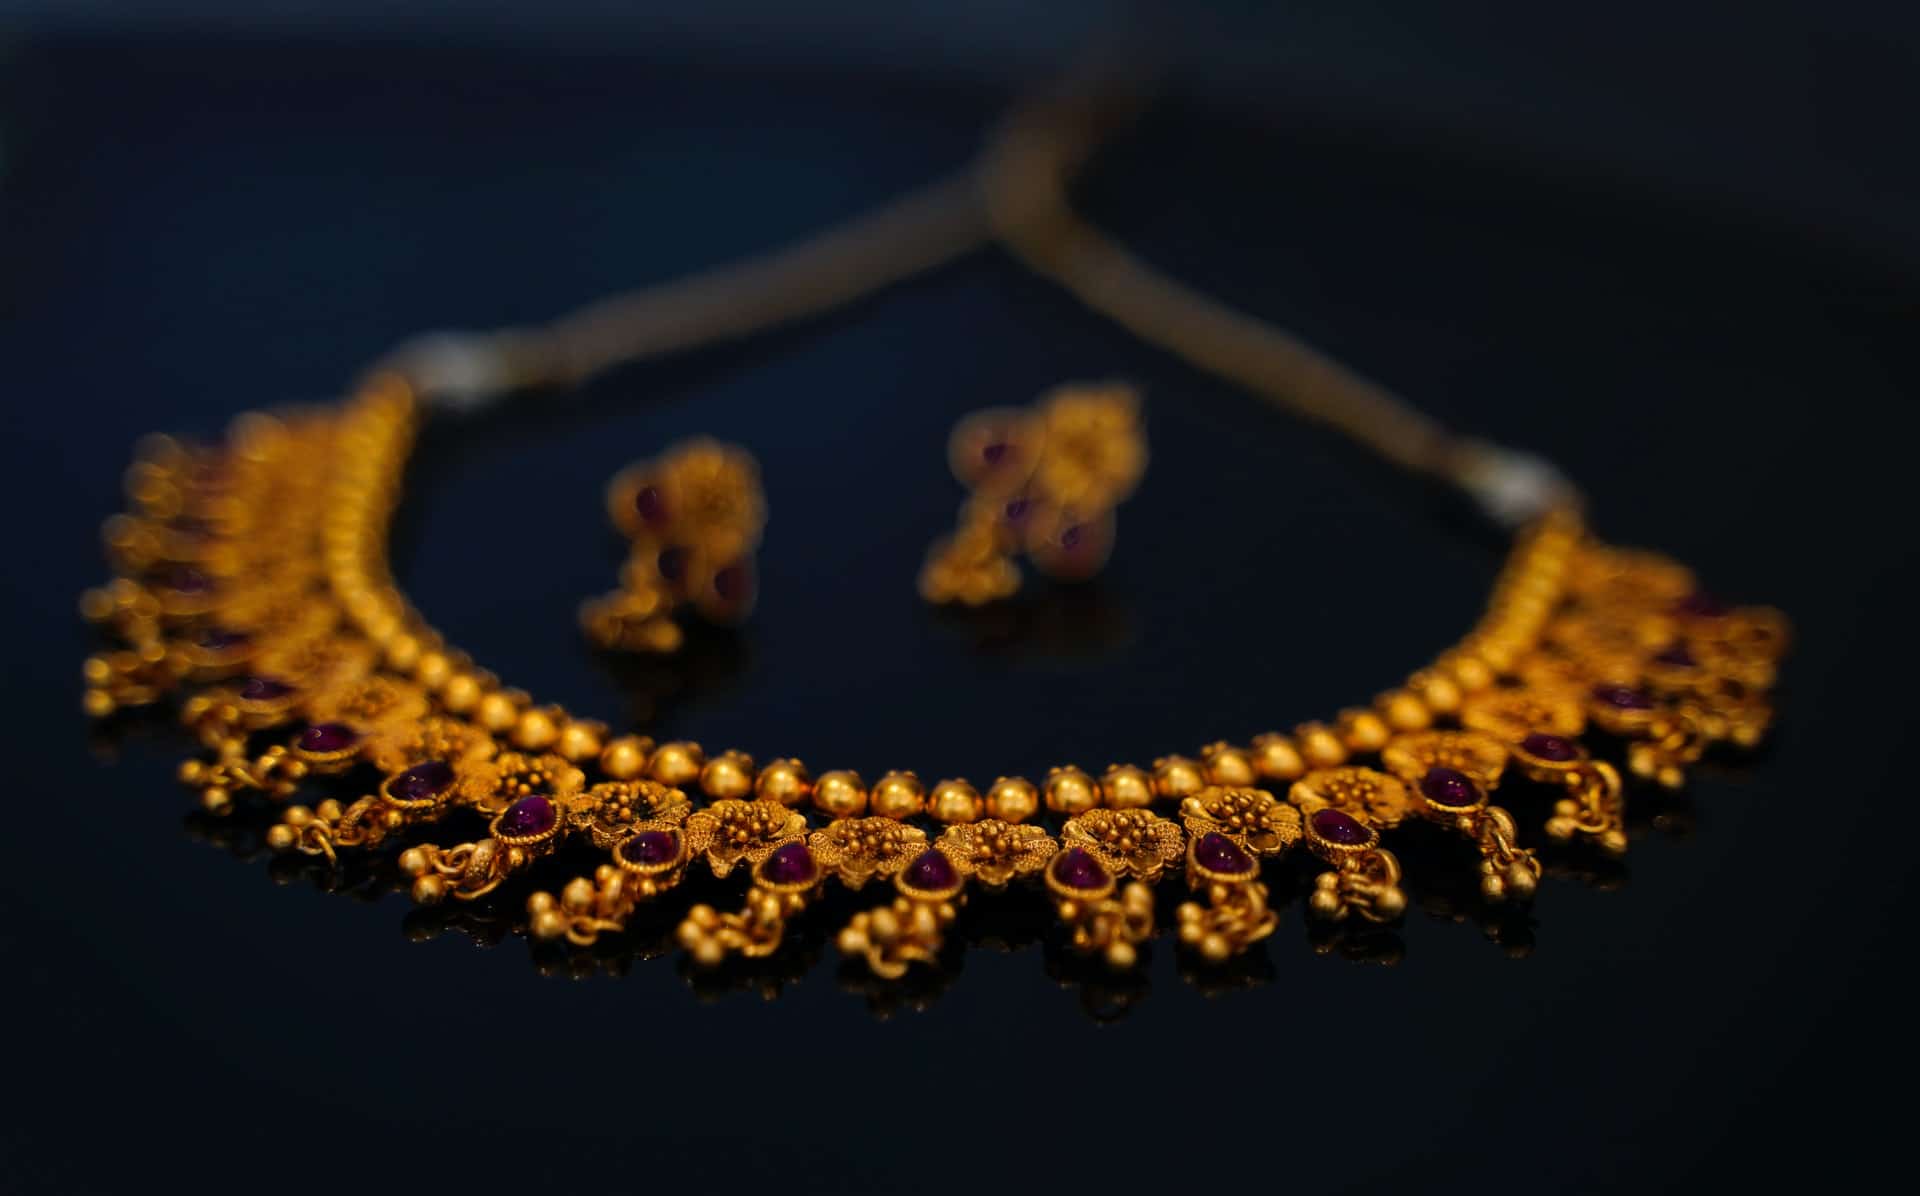 Gold jewelry, representing a husband's request for an unequal division of net family property